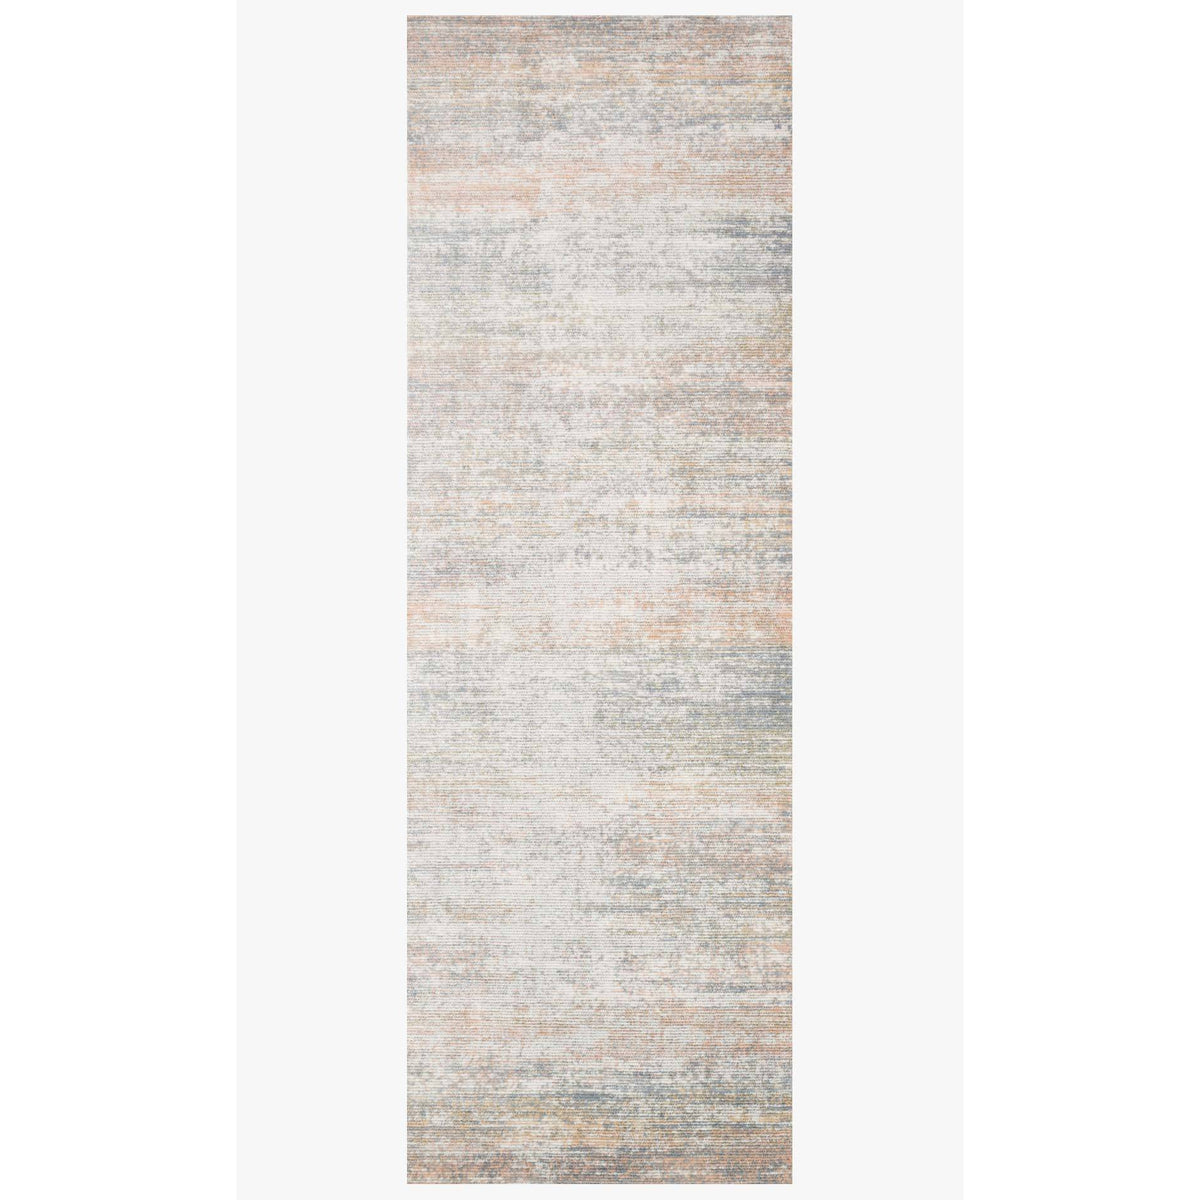 Lucia Rugs by Loloi - LUC-05 Mist-Loloi Rugs-Blue Hand Home